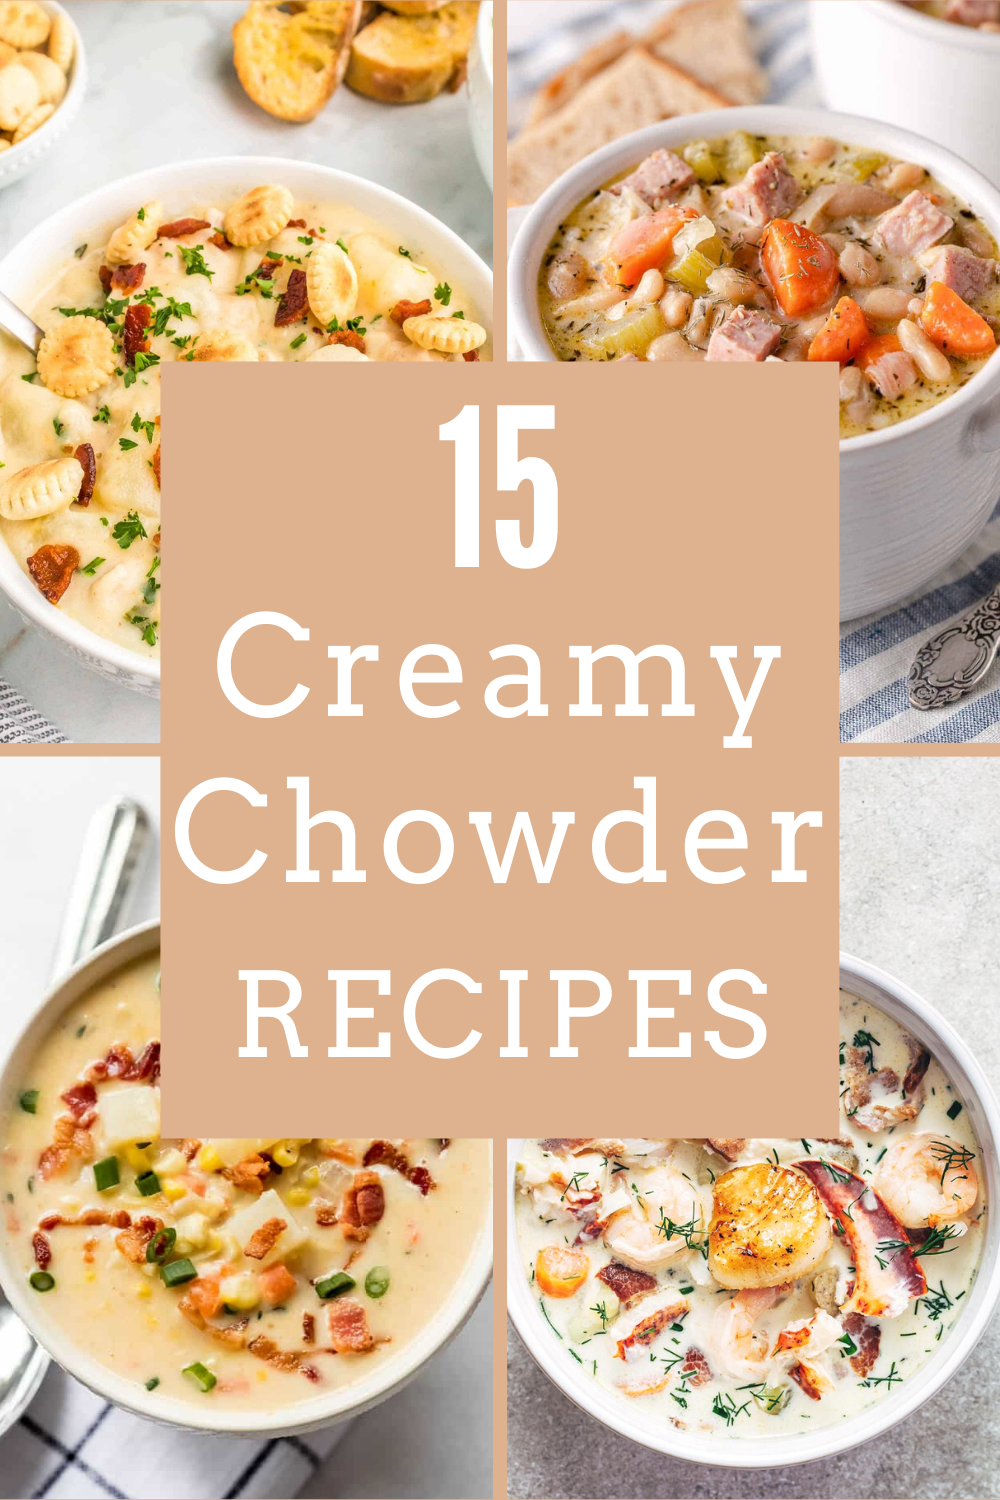 A composite image shows four bowls of chowder with a rectangle superimposed over them that says "15 creamy chowder recipes."